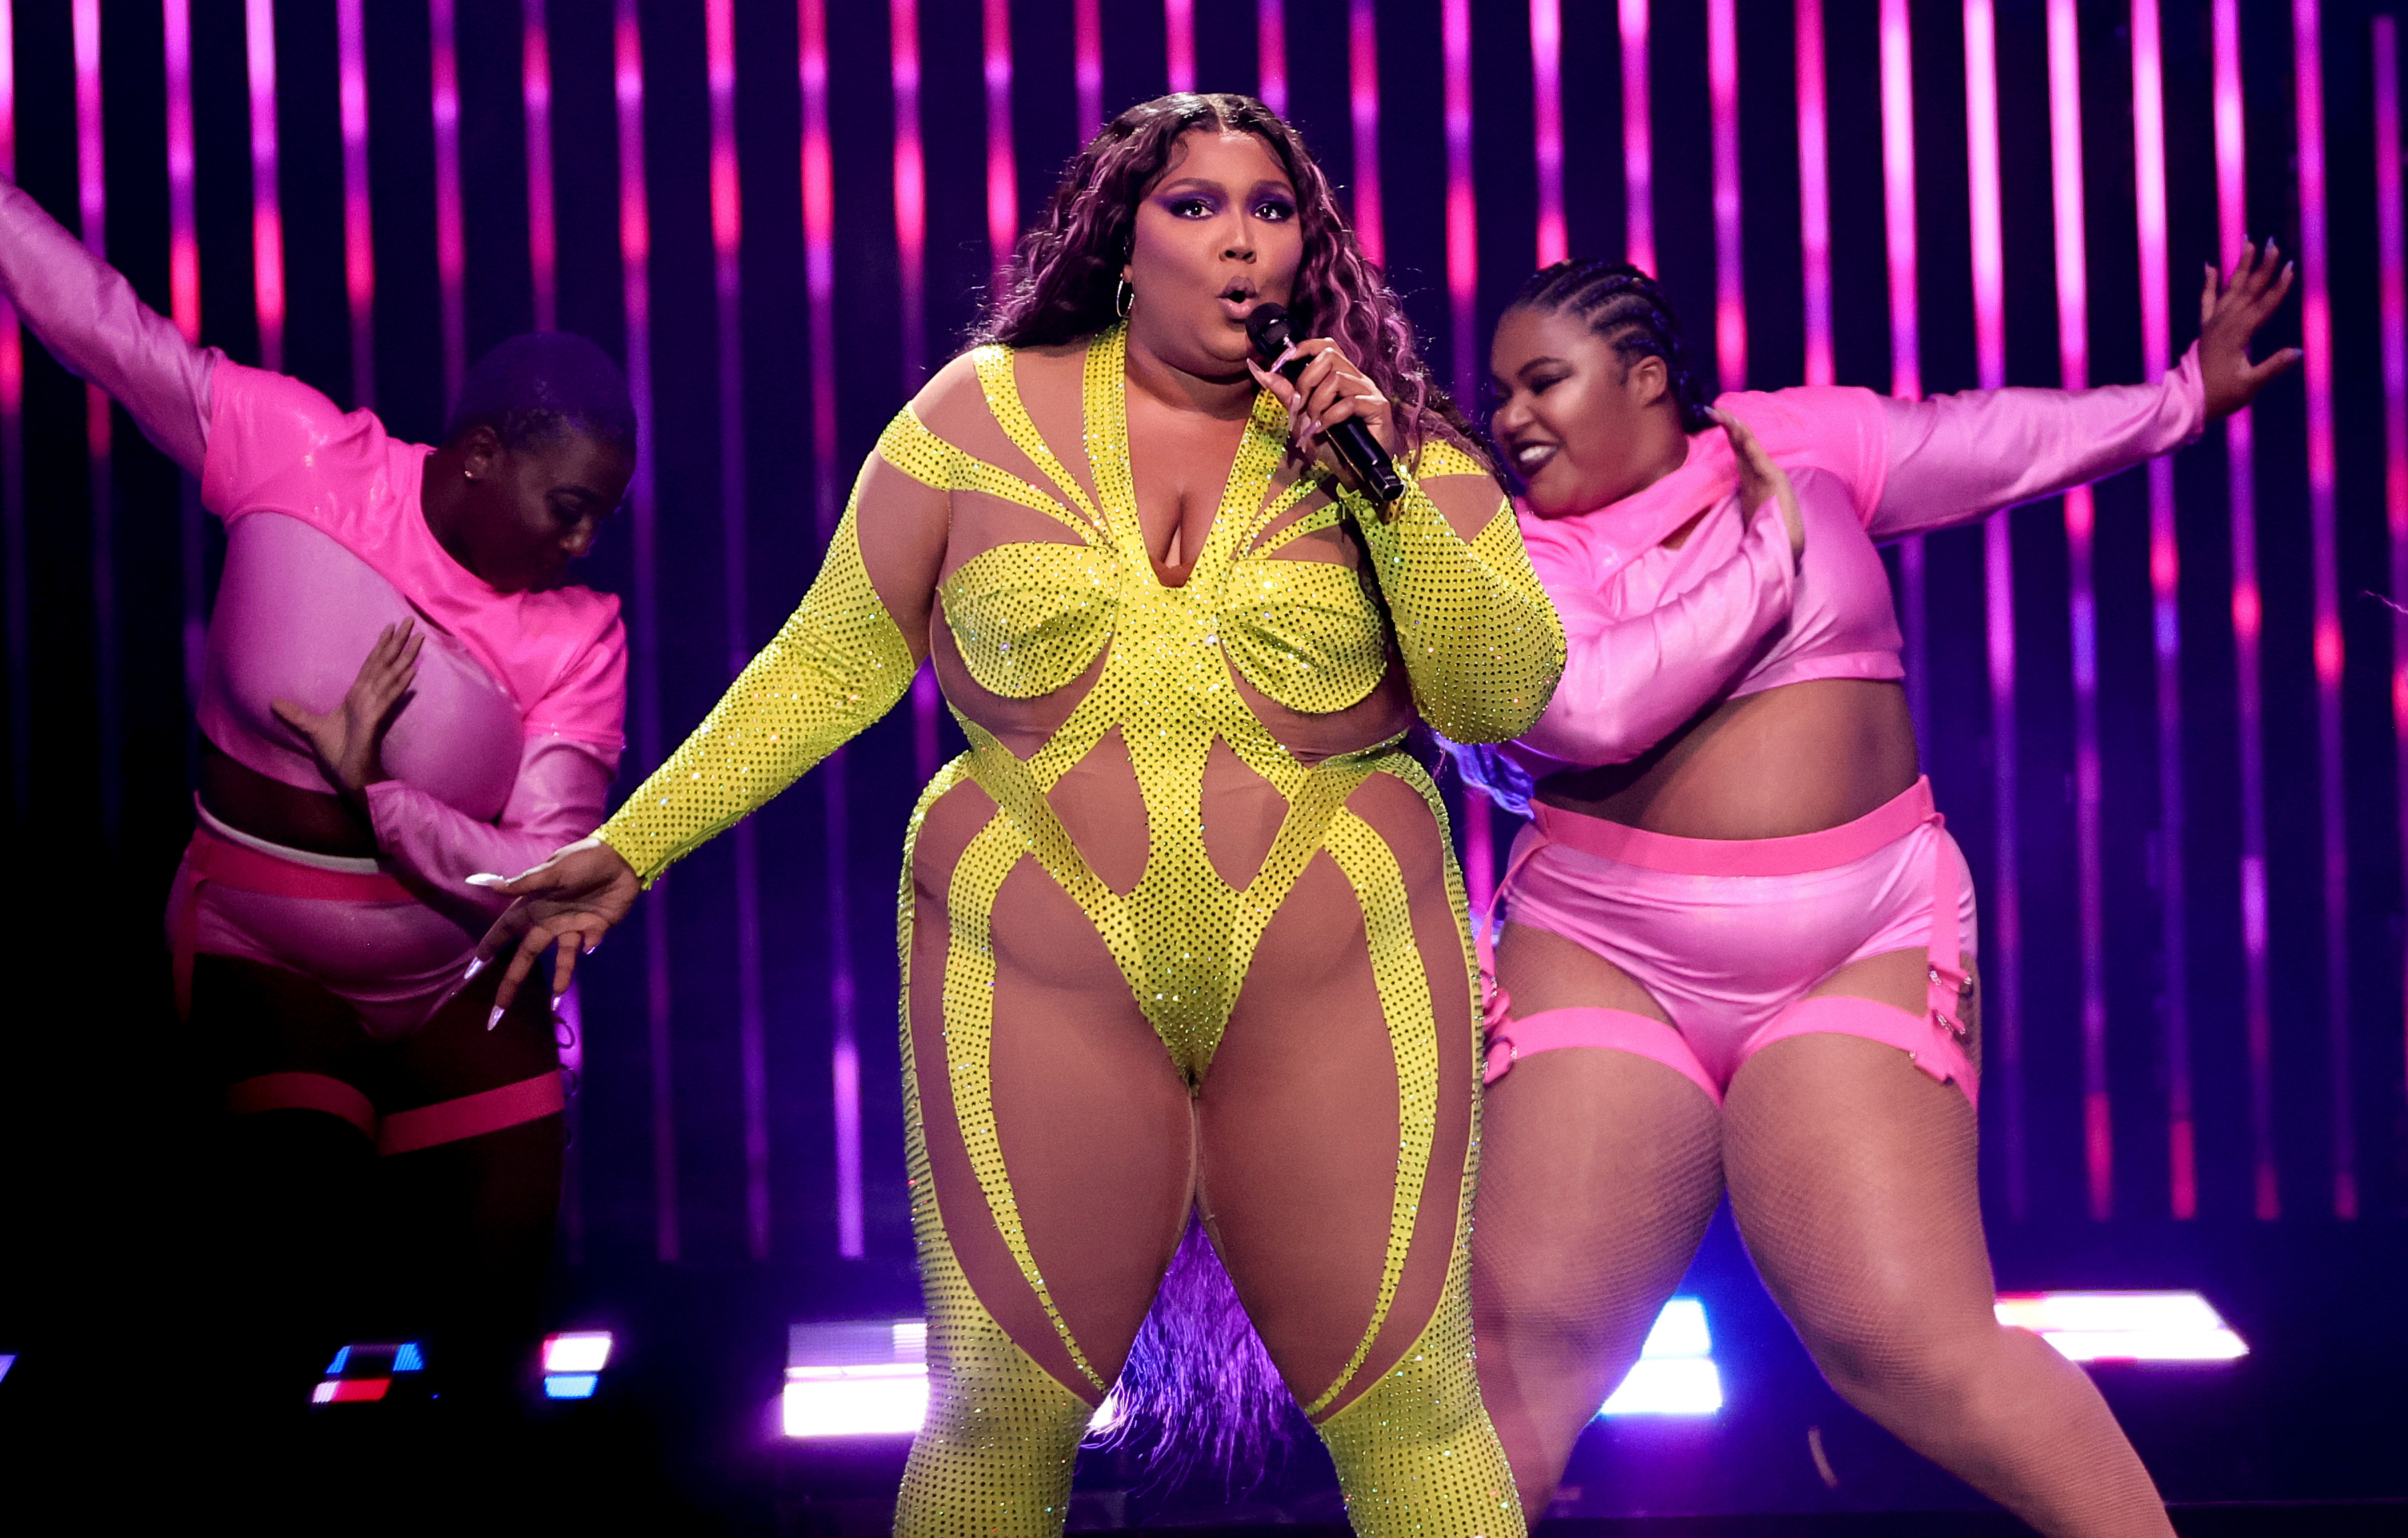 Lizzo singing live in a concert  in New York City. She is wearing a sheer and neon yellow body suit and is actively singing into the mike. She has dancers and pink lights behind her. 